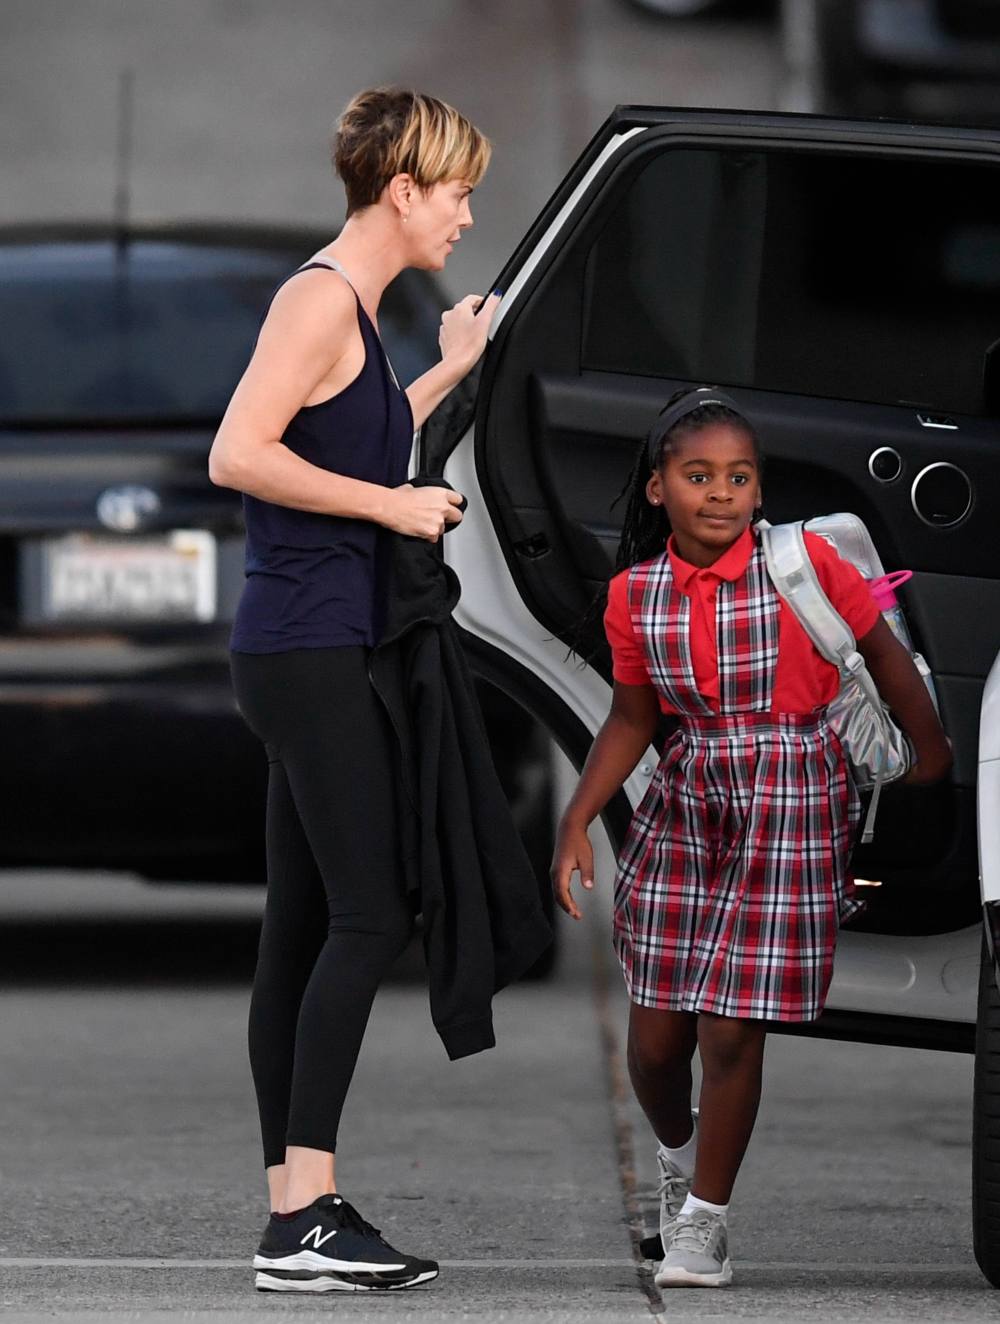 Child drags charlize theron The Fate